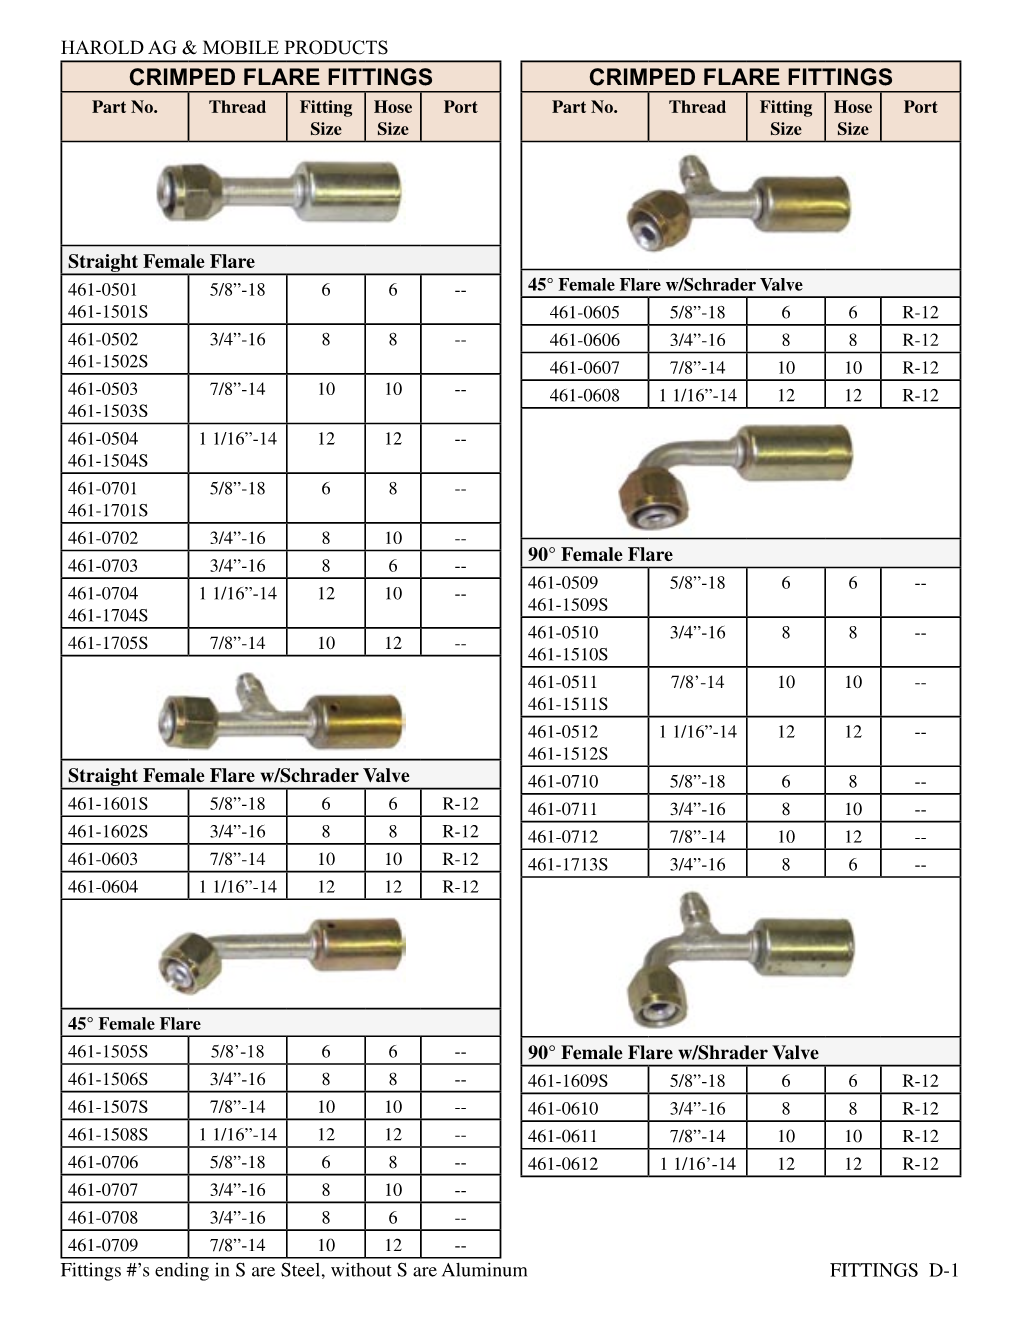 HECO Fittings and Service Valves Illustrated Catalog